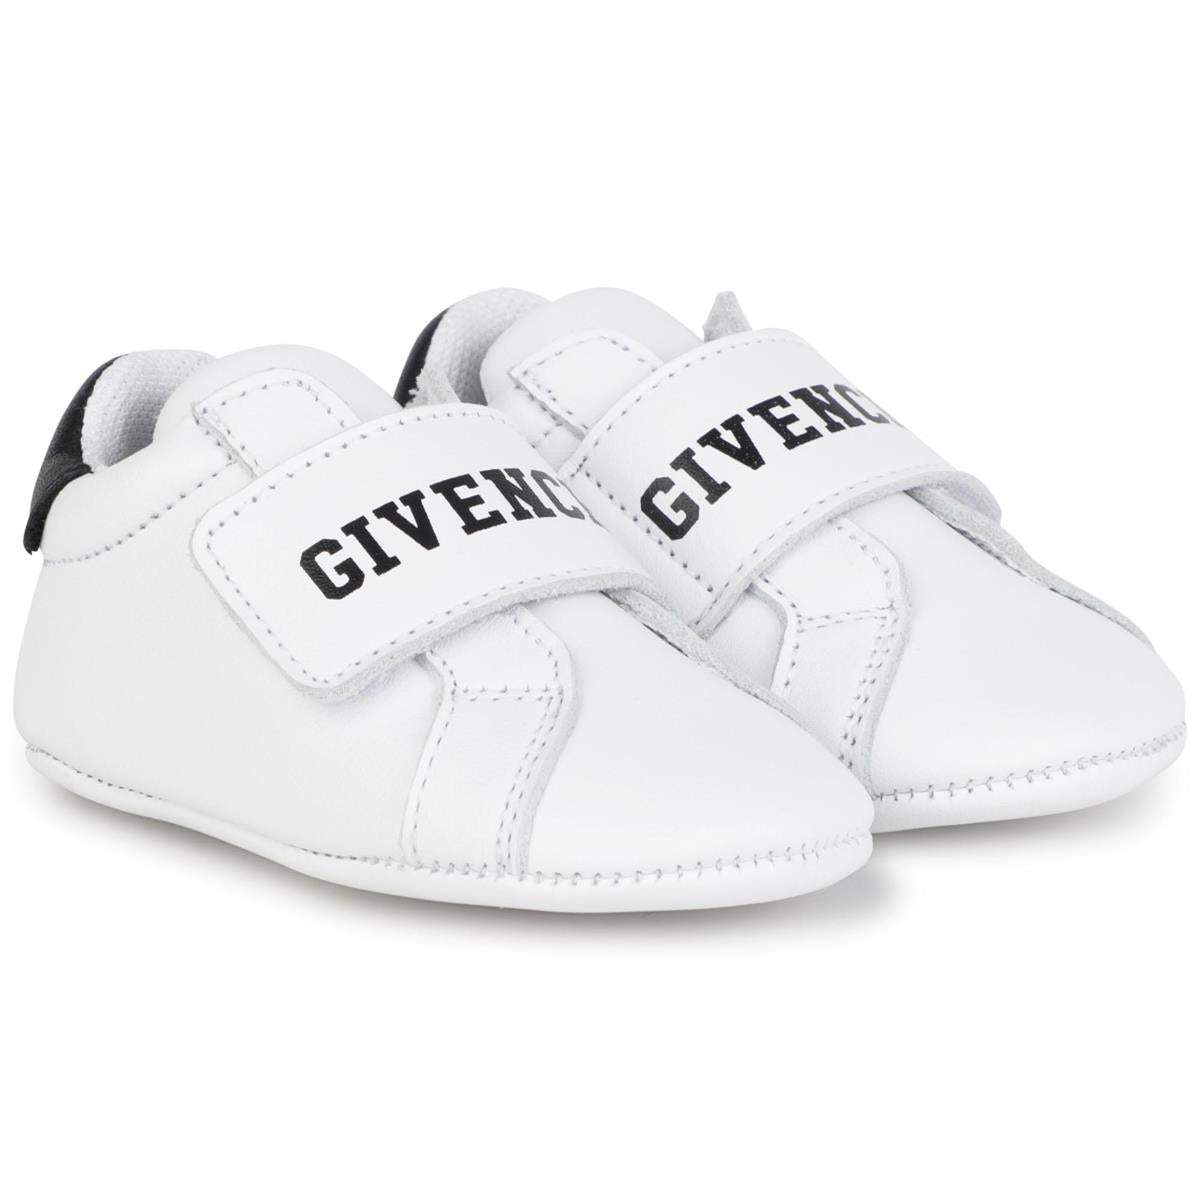 Baby Boys & Girls White Shoes